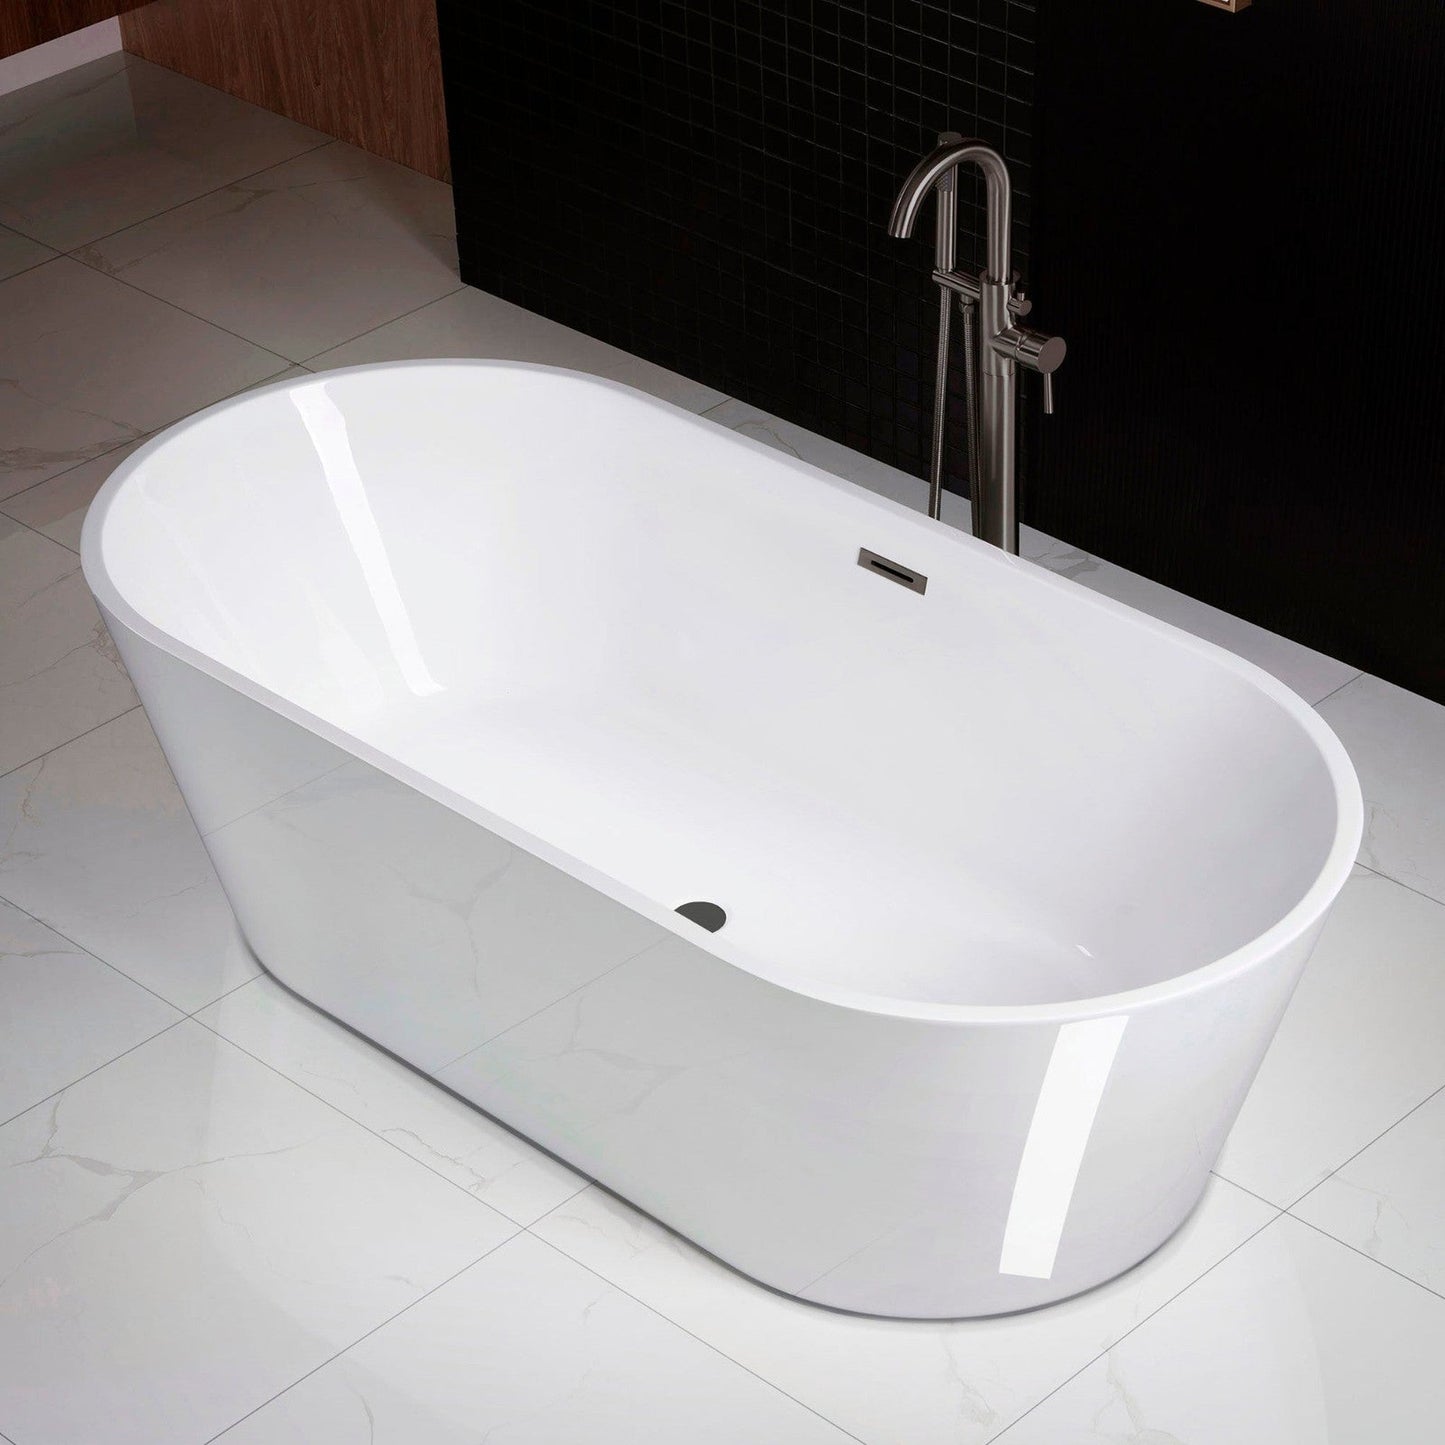 WoodBridge 71" White Acrylic Freestanding Contemporary Soaking Bathtub With Matte Black Drain, Overflow, F0025MBSQ Tub Filler and Caddy Tray